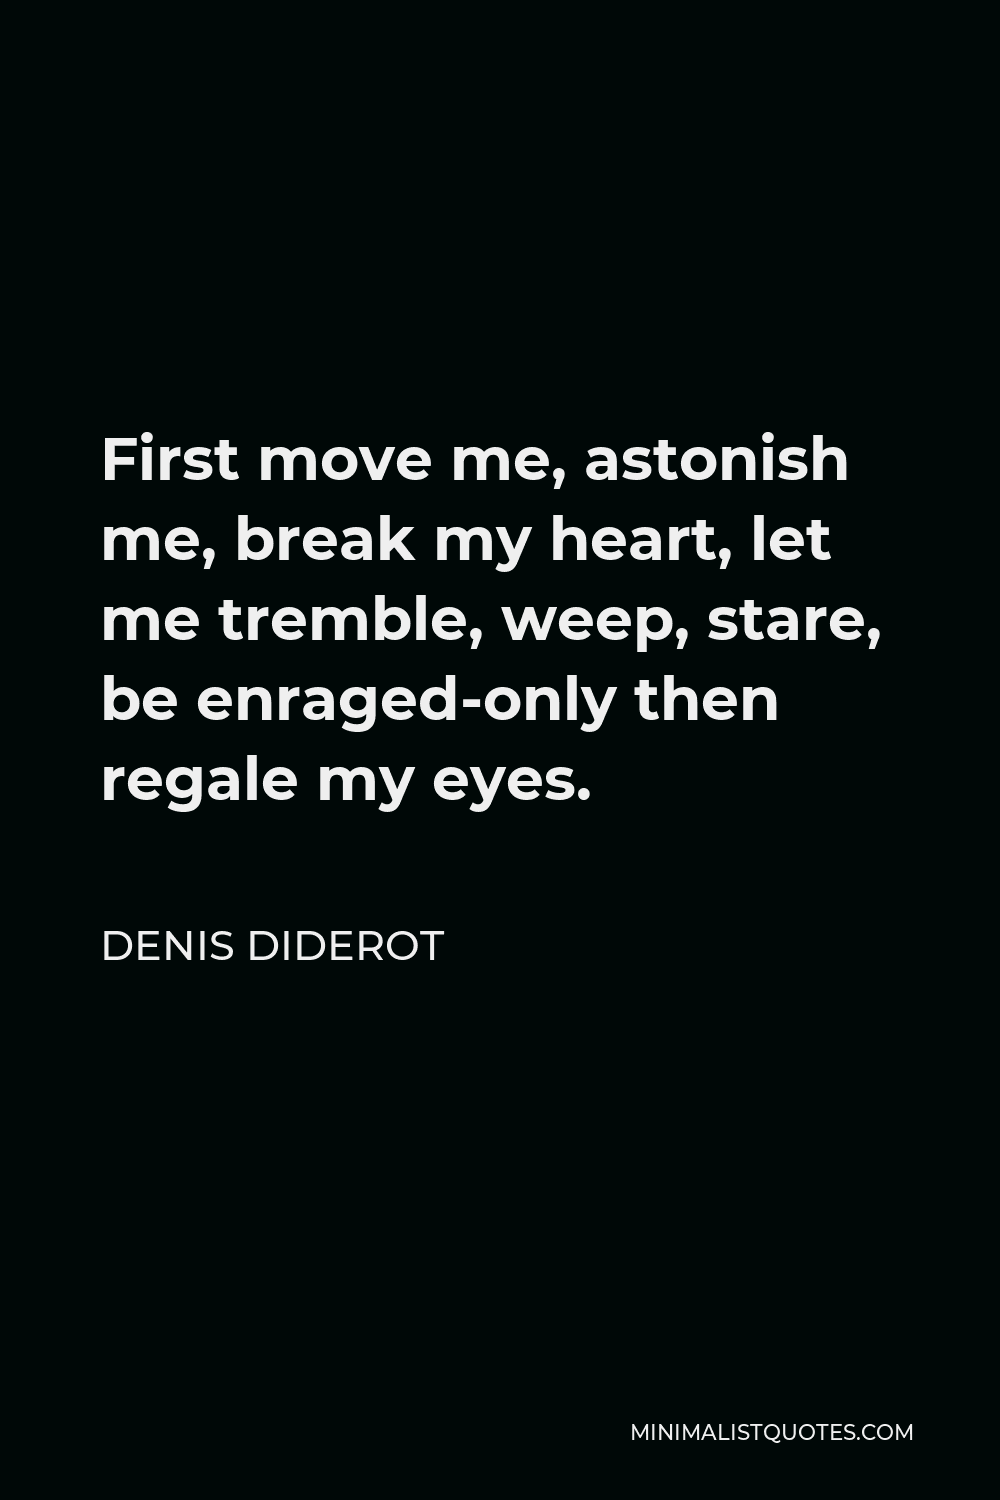 Denis Diderot Quote - First move me, astonish me, break my heart, let me tremble, weep, stare, be enraged-only then regale my eyes.